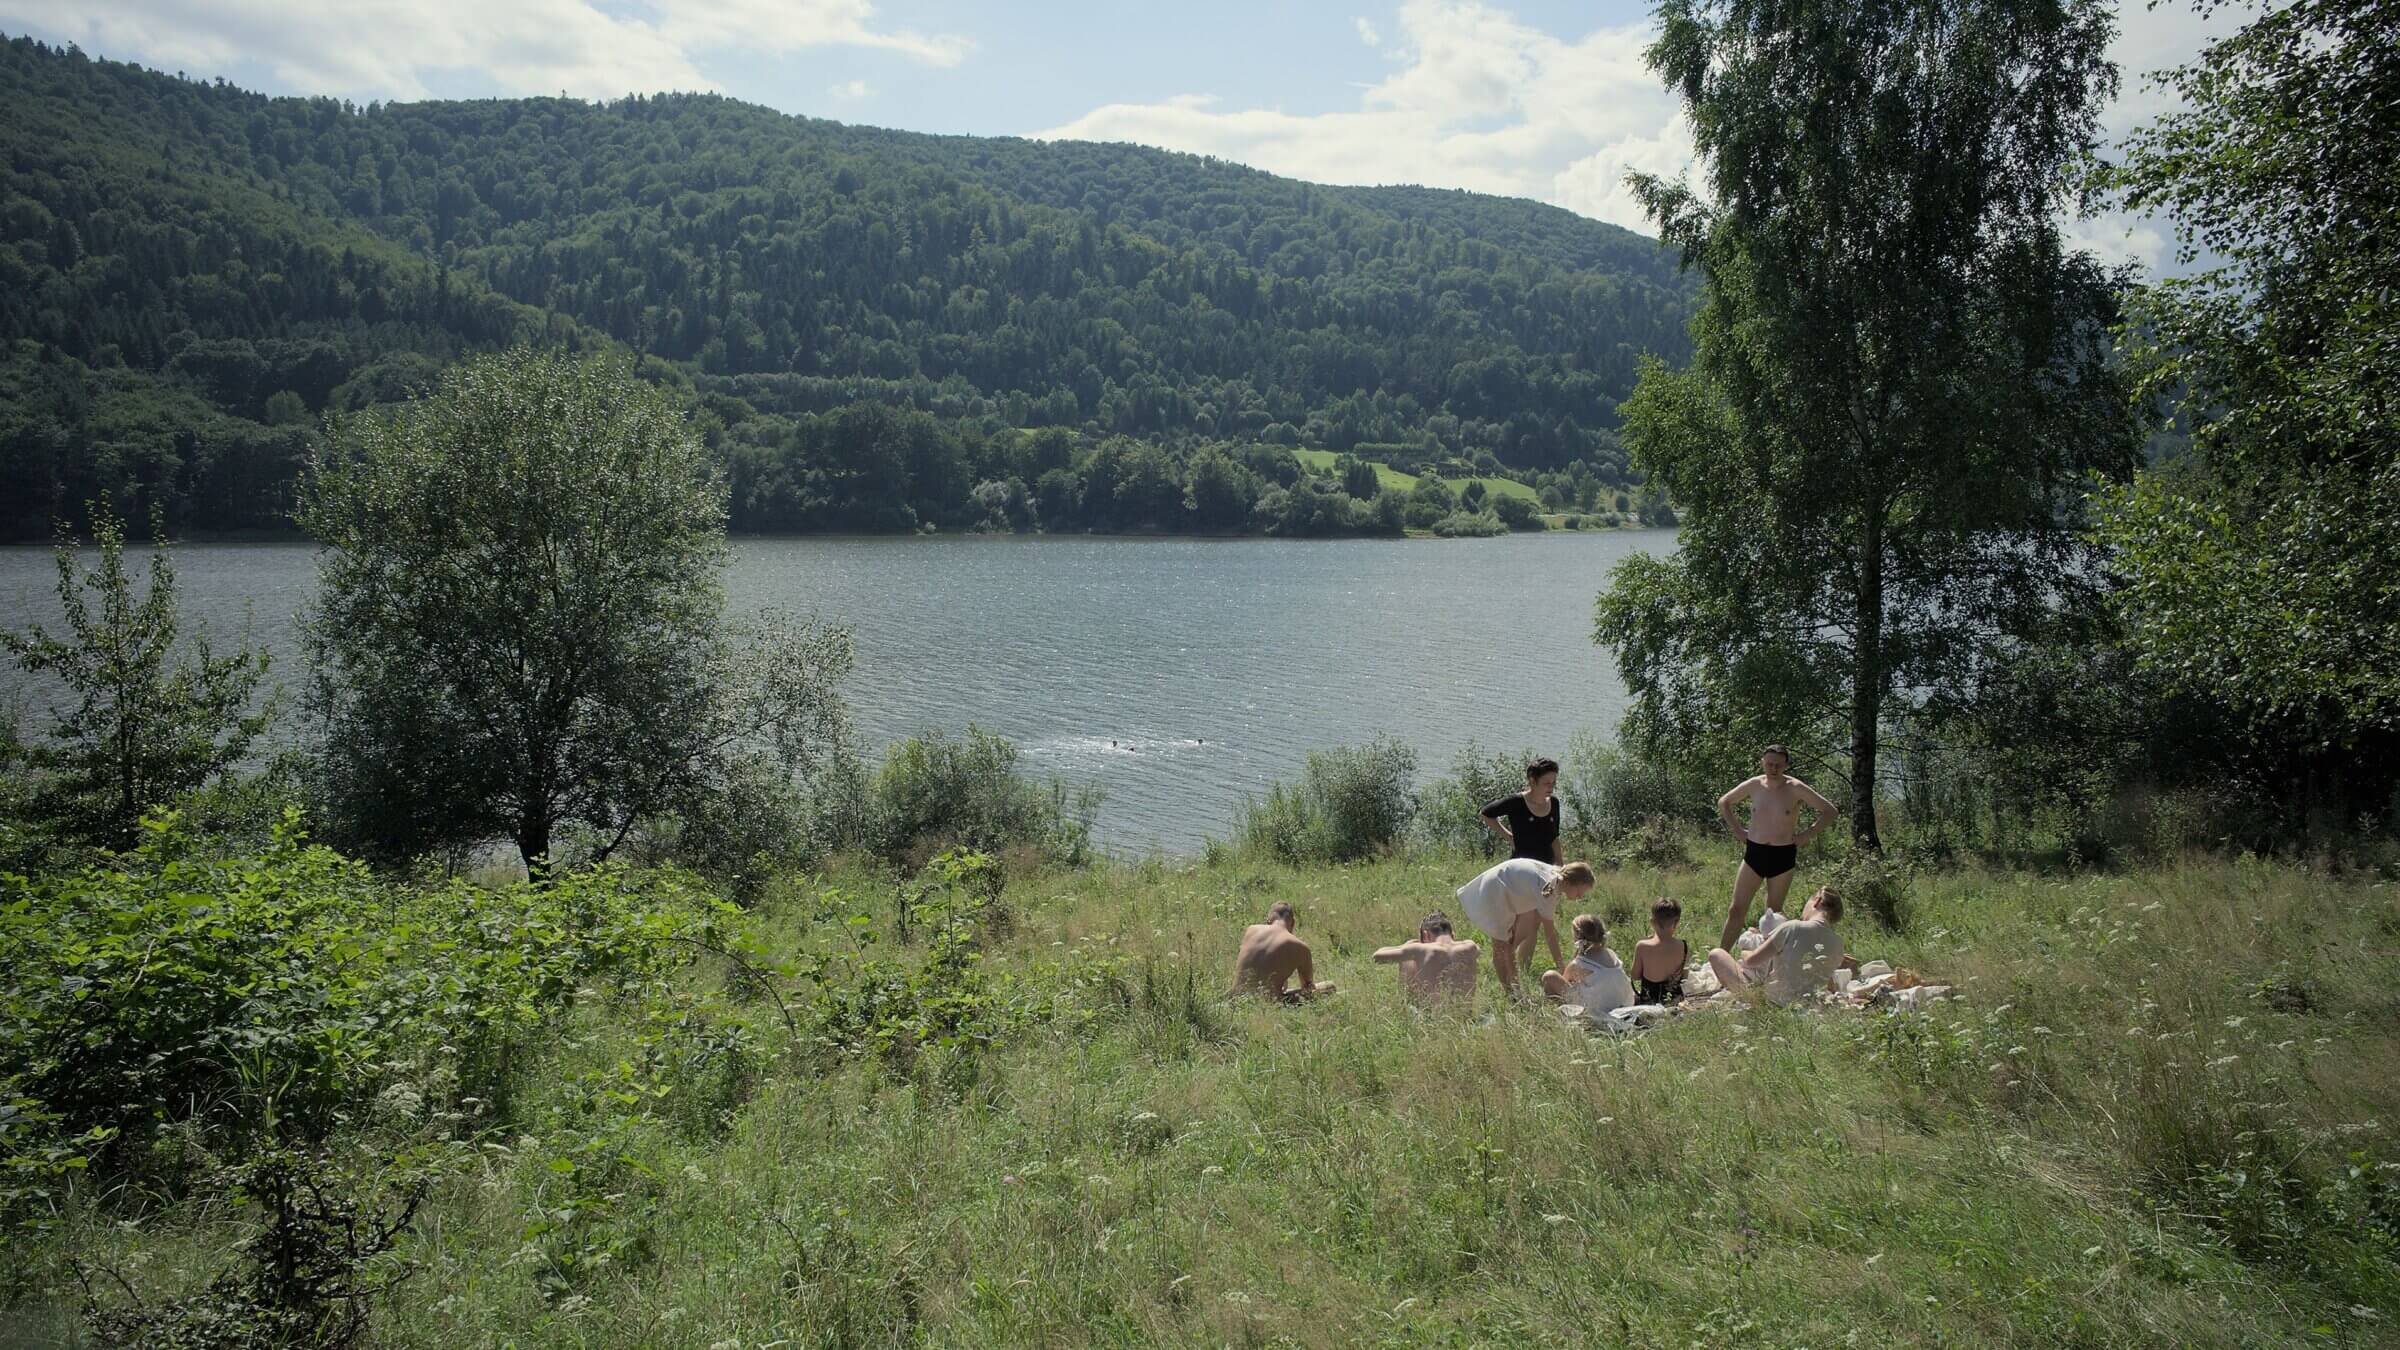 Jonathan Glazer's film shows the idyllic country on the threshold of hell.